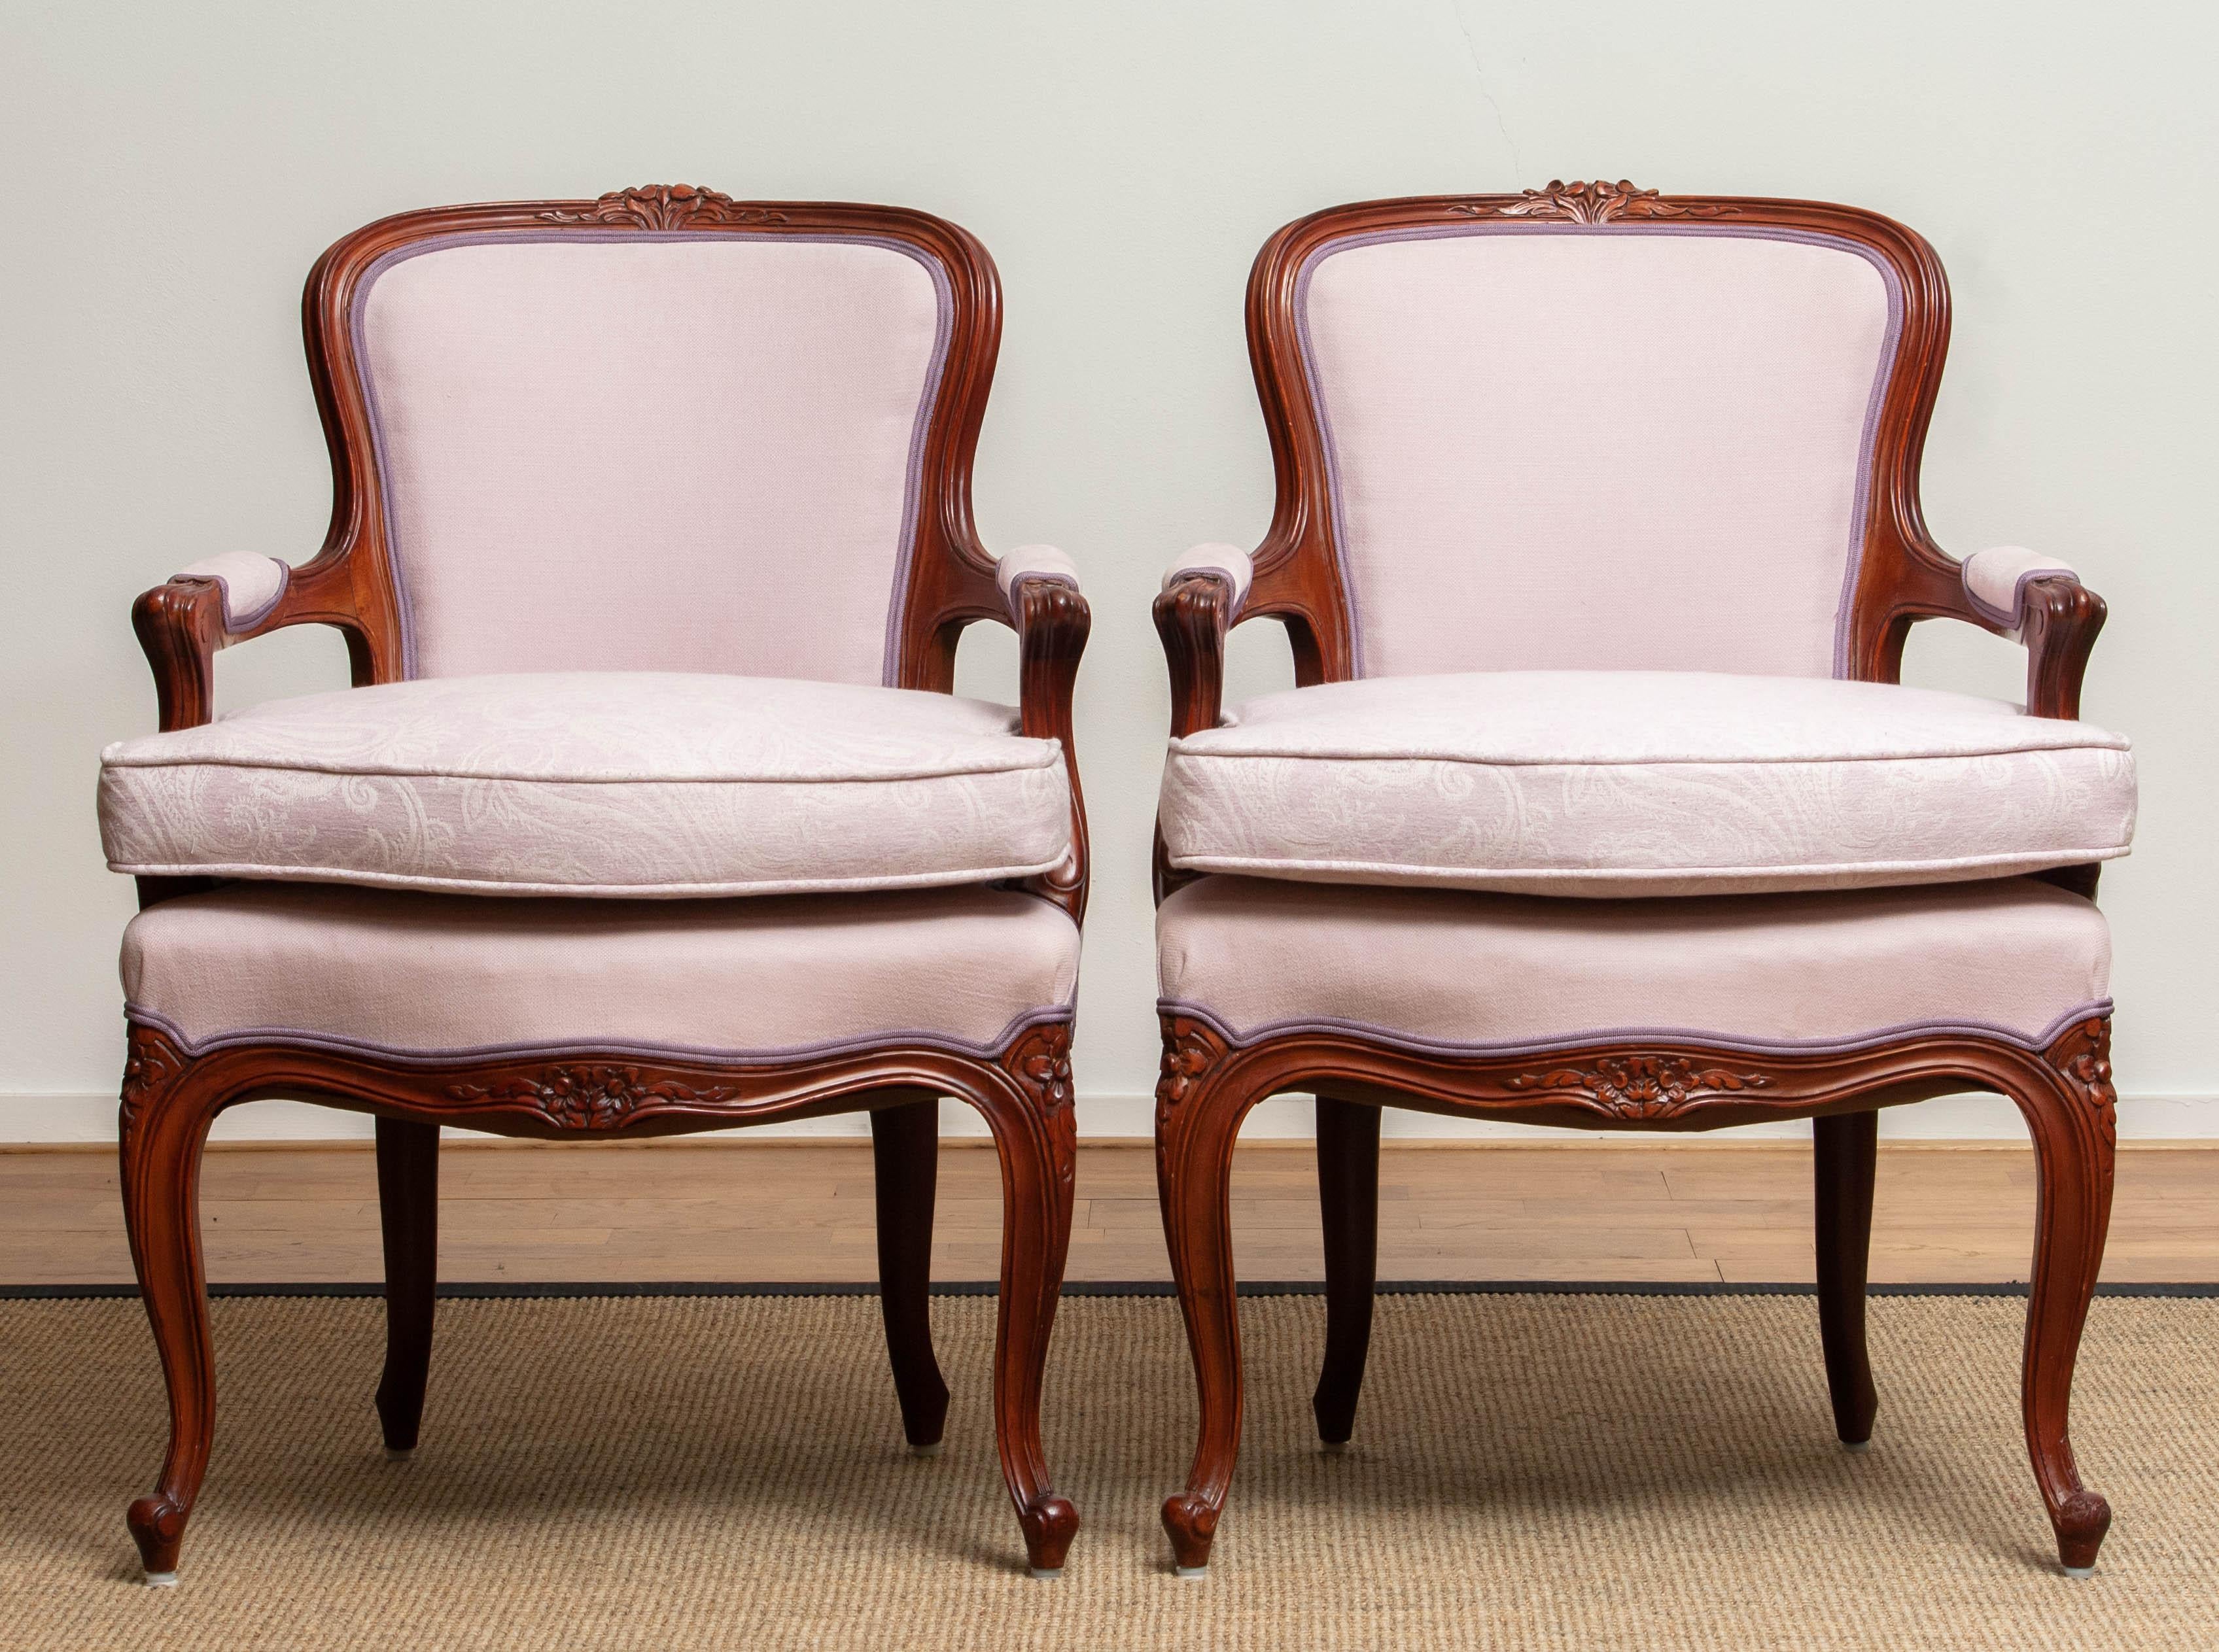 1950s, The Swedish Neo-Rococo, and finished in the shabby chic technique arm-chair is in perfect condition. Upholstered in pink fabric and an extra cushion for extra comfort also in pink jacquard. Seat height with the extra cushion is: 21,20 inches